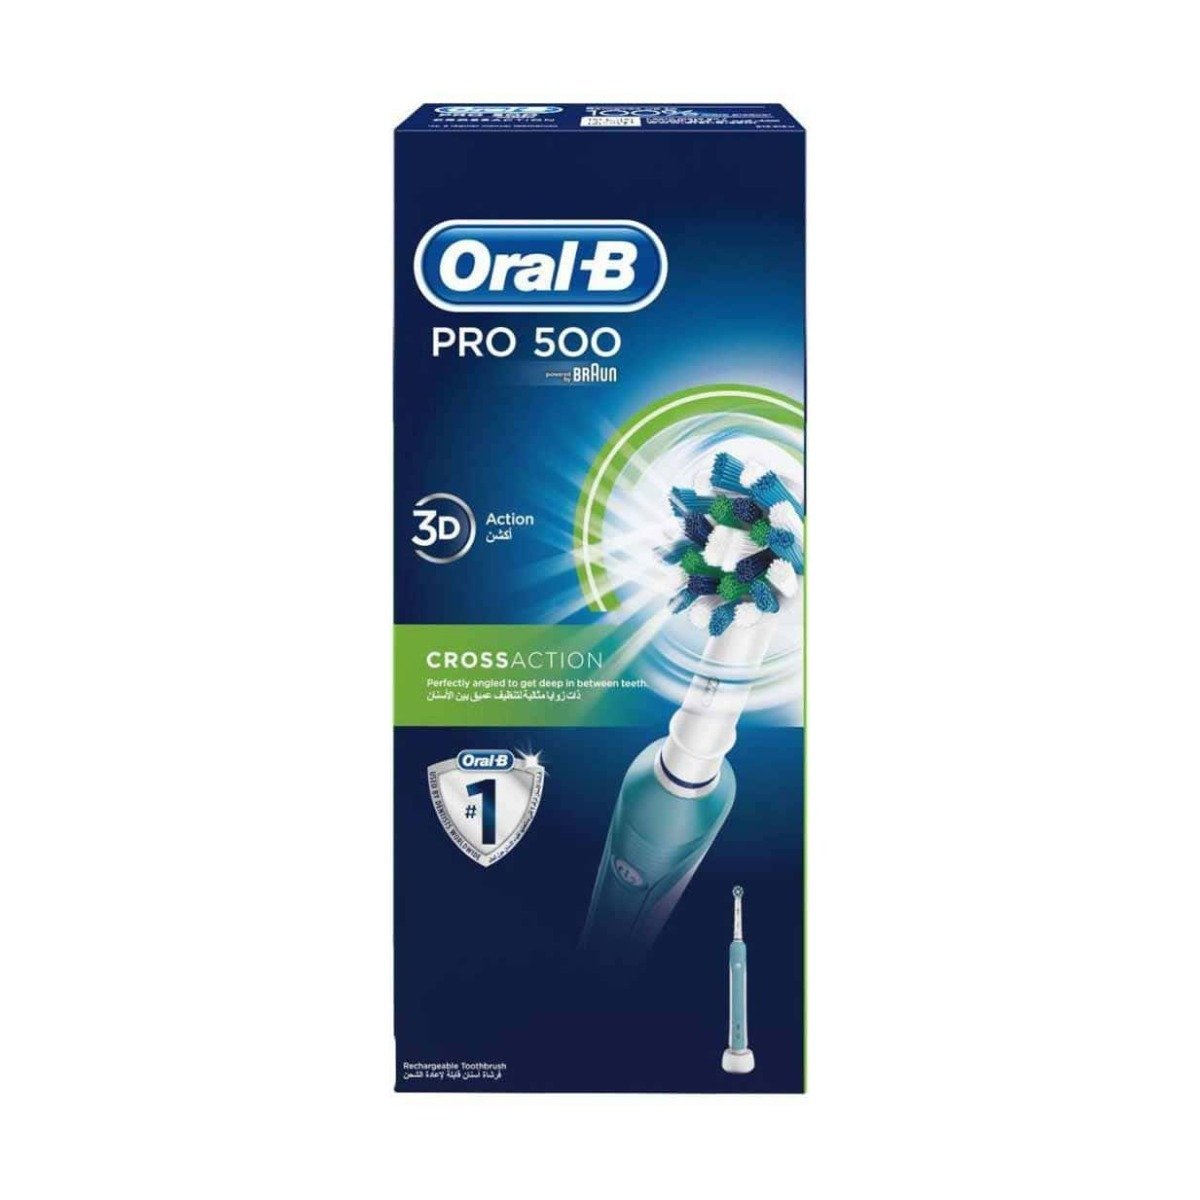 Oral-B Pro 500 Electric Toothbrush - Bloom Pharmacy